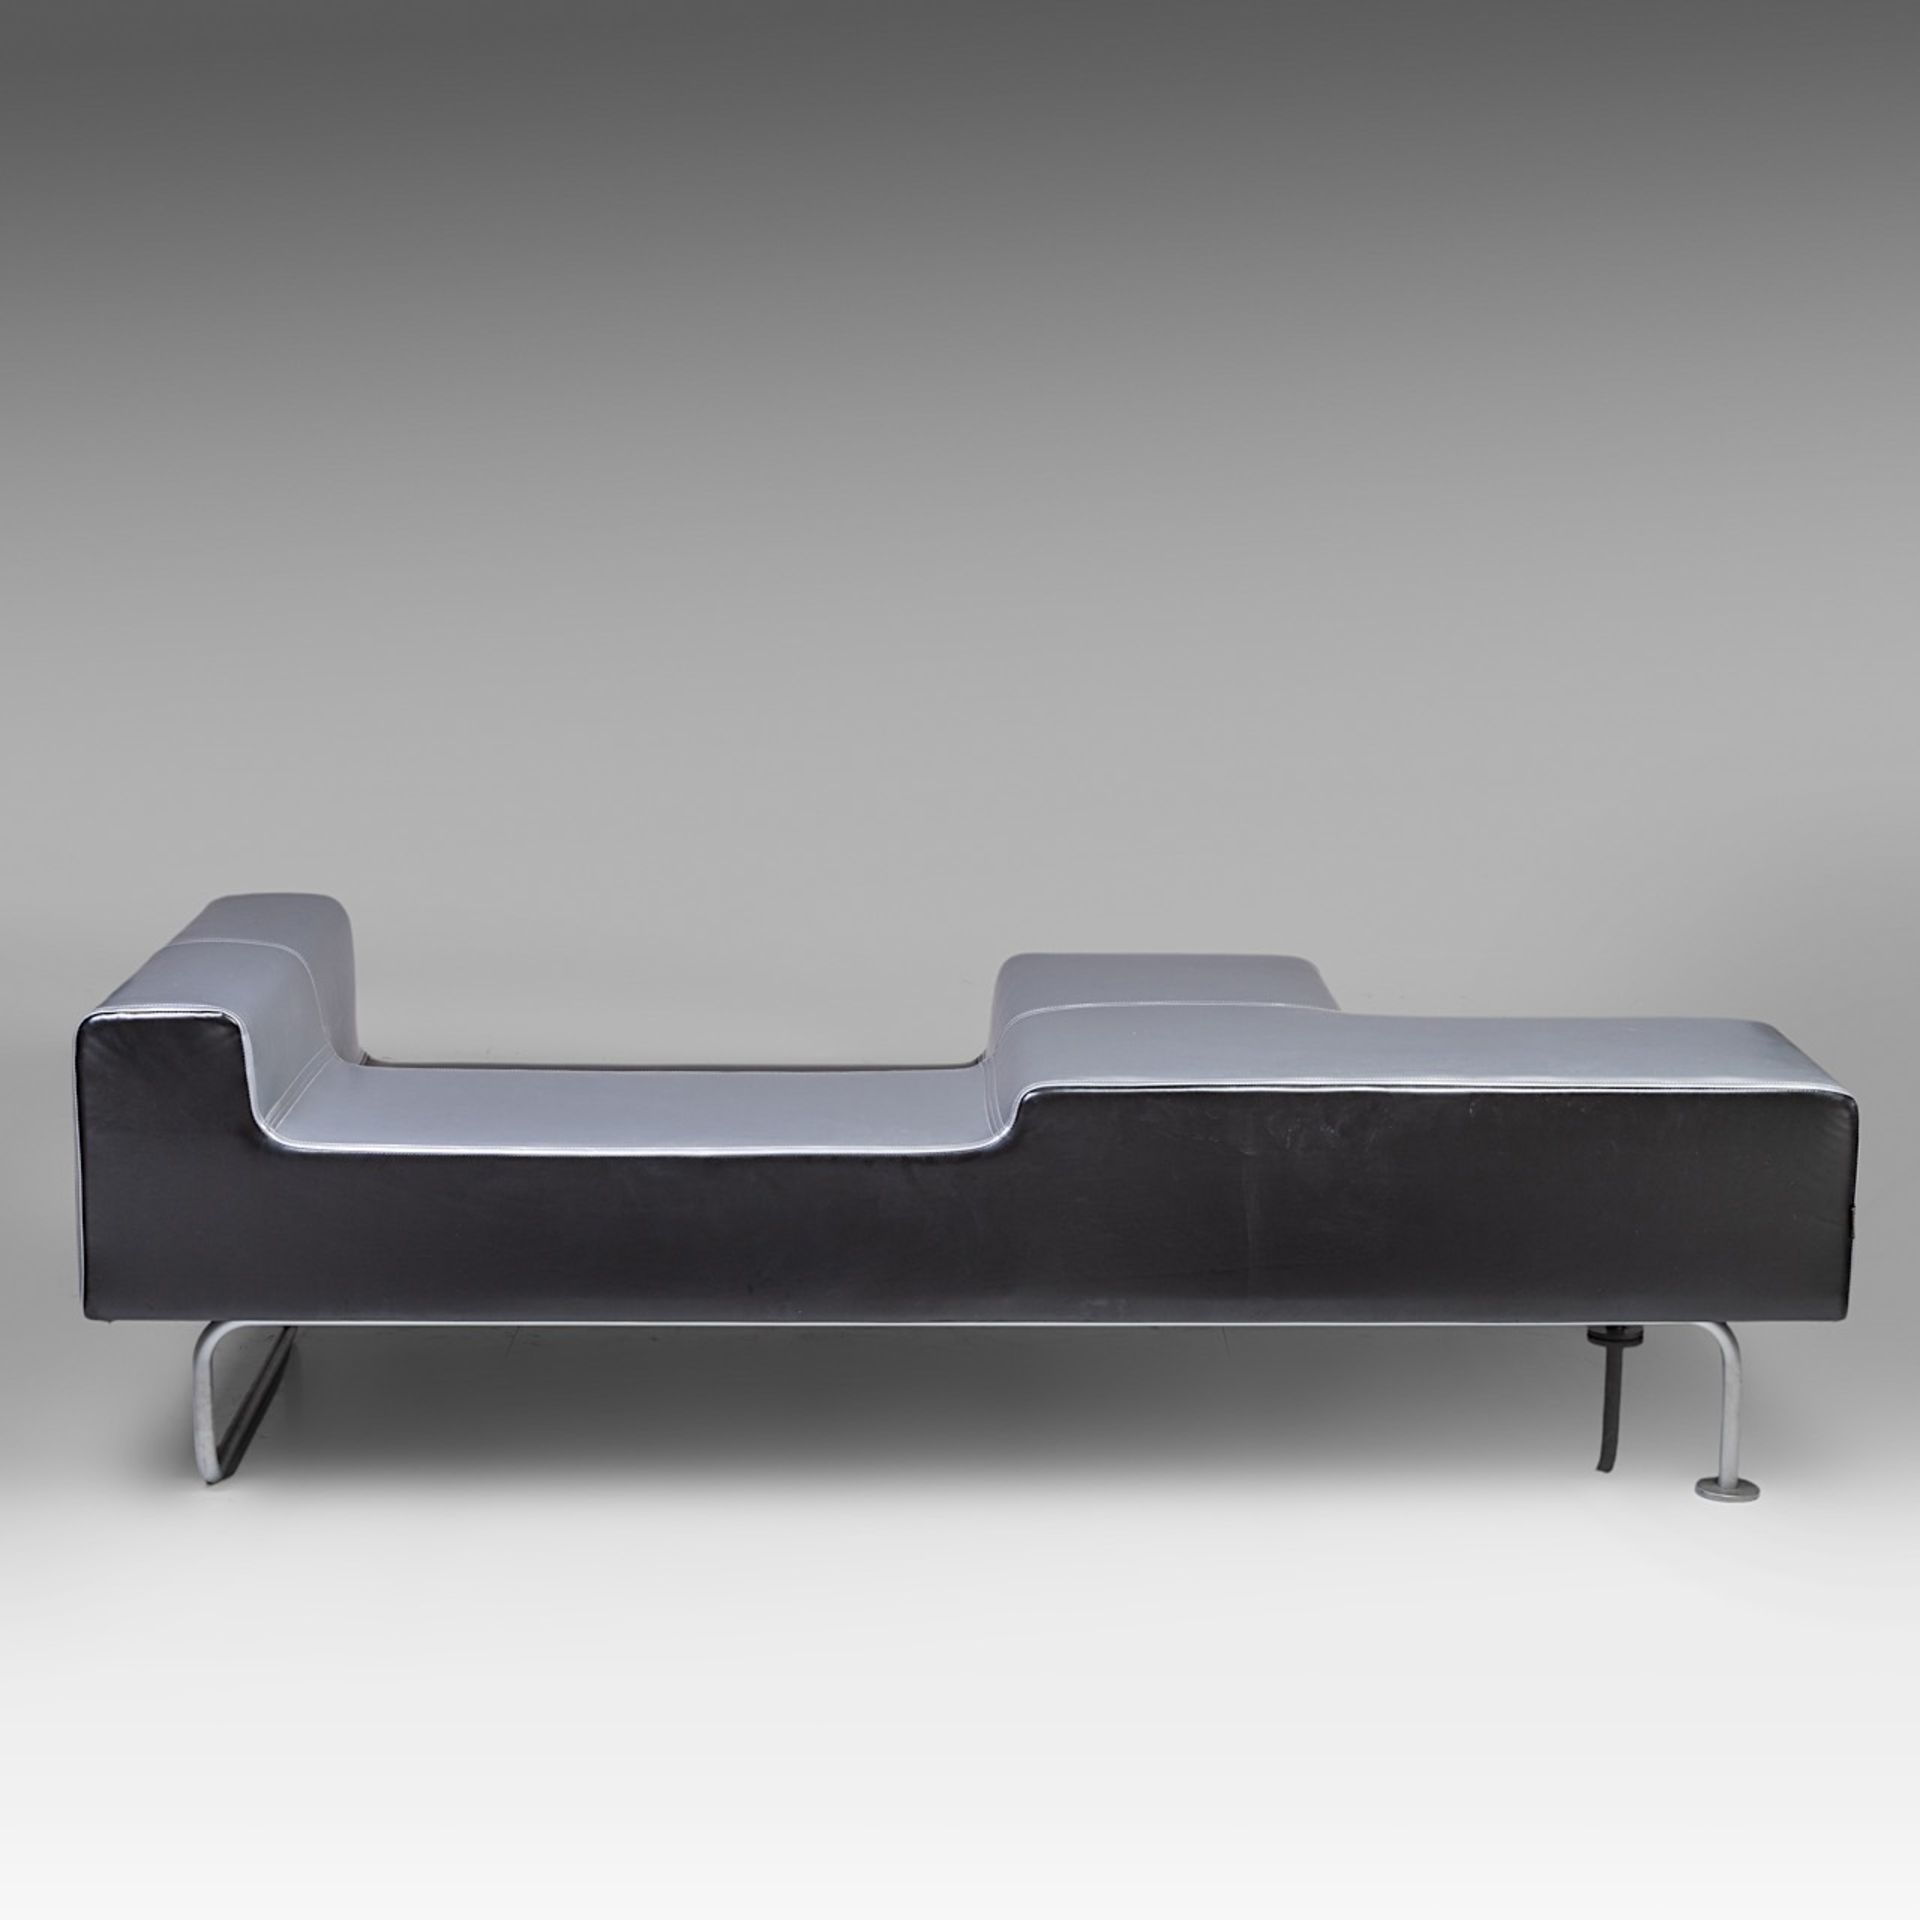 A daybed by Bruno La Mela for Antidiva, Italy, 2000, H 60 - W 212 - D 90 cm - Image 7 of 11